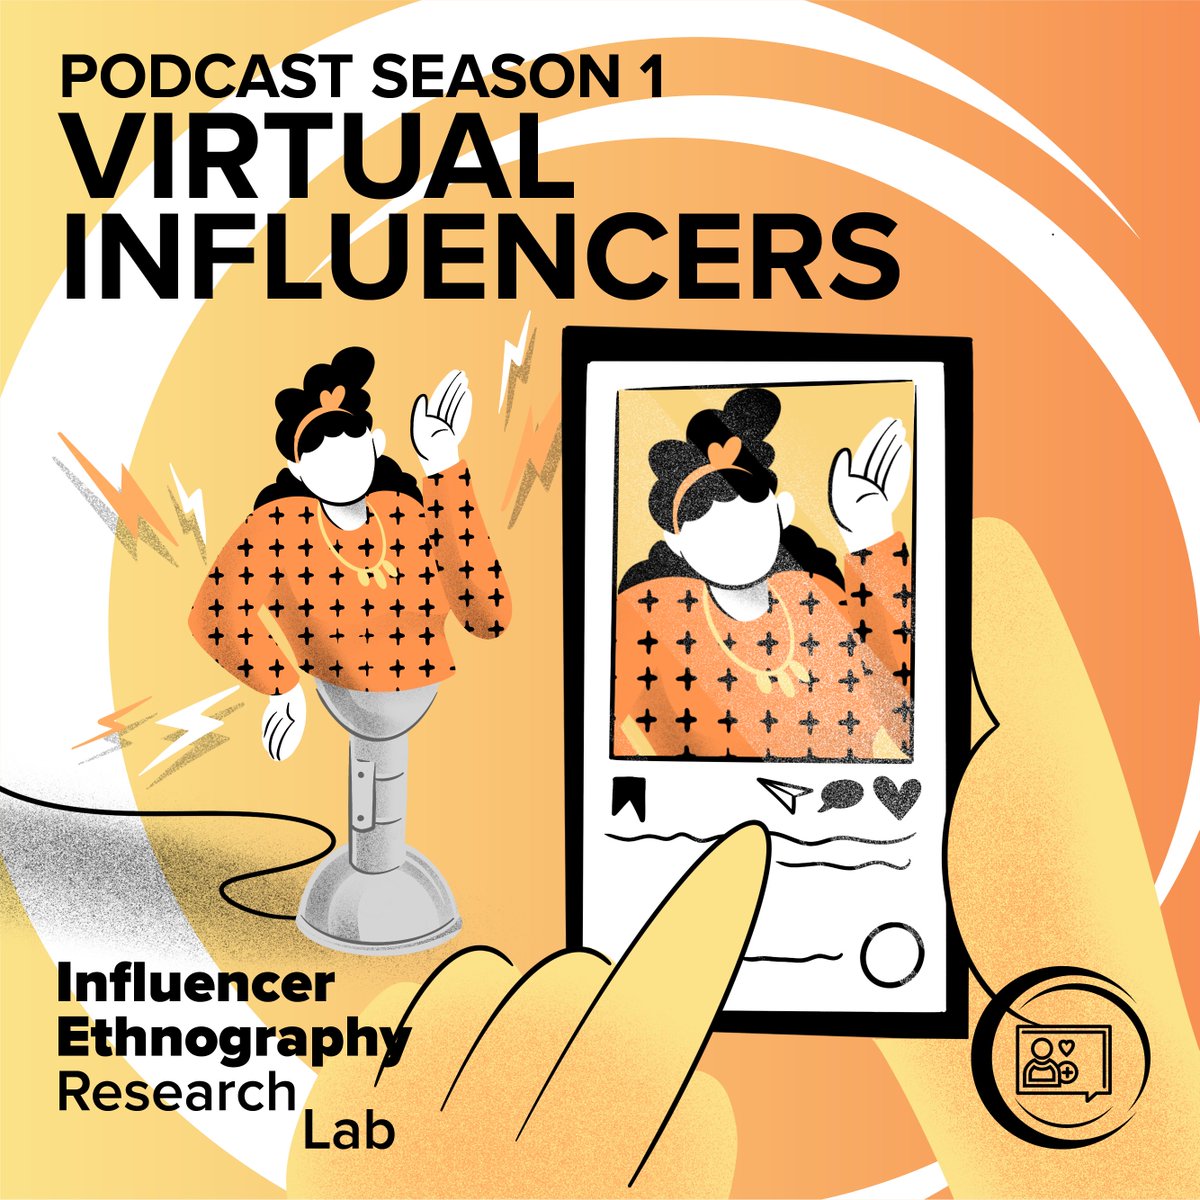 This week's podcast episode is out! Listen to @channelera talk all things her PhD project and virtual influencers 🤳💻 Listen here -> open.spotify.com/episode/3YsBNu…